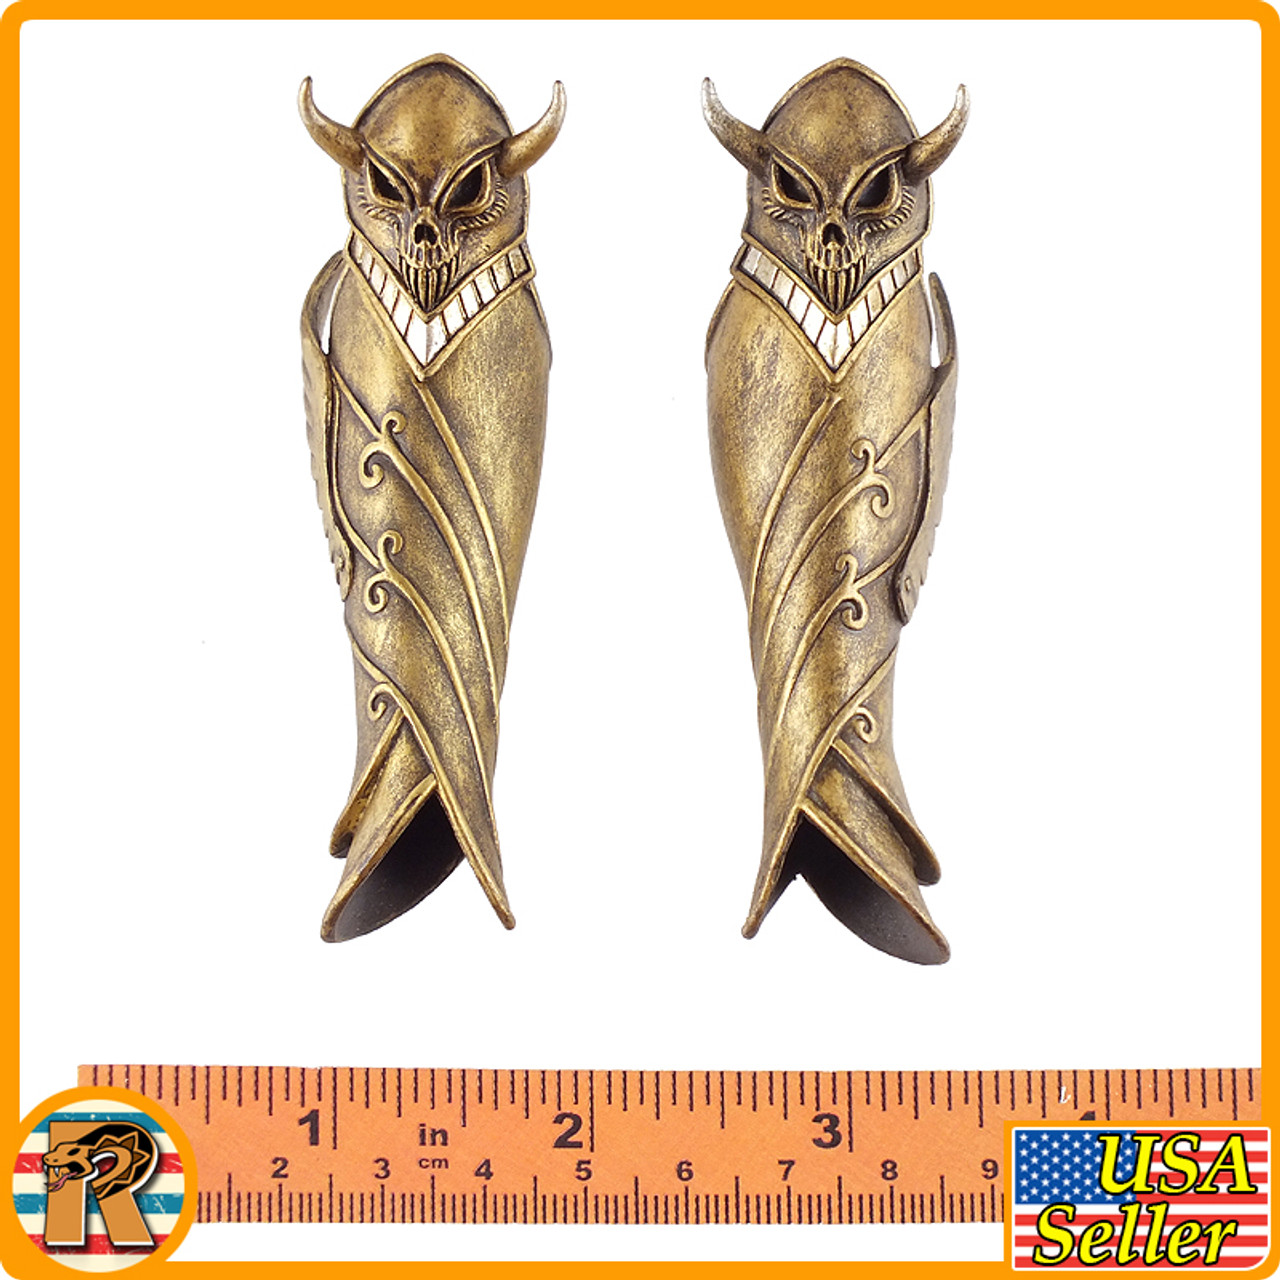 Knight of Fire (Gold) - Leg Armor #2 - 1/6 Scale -